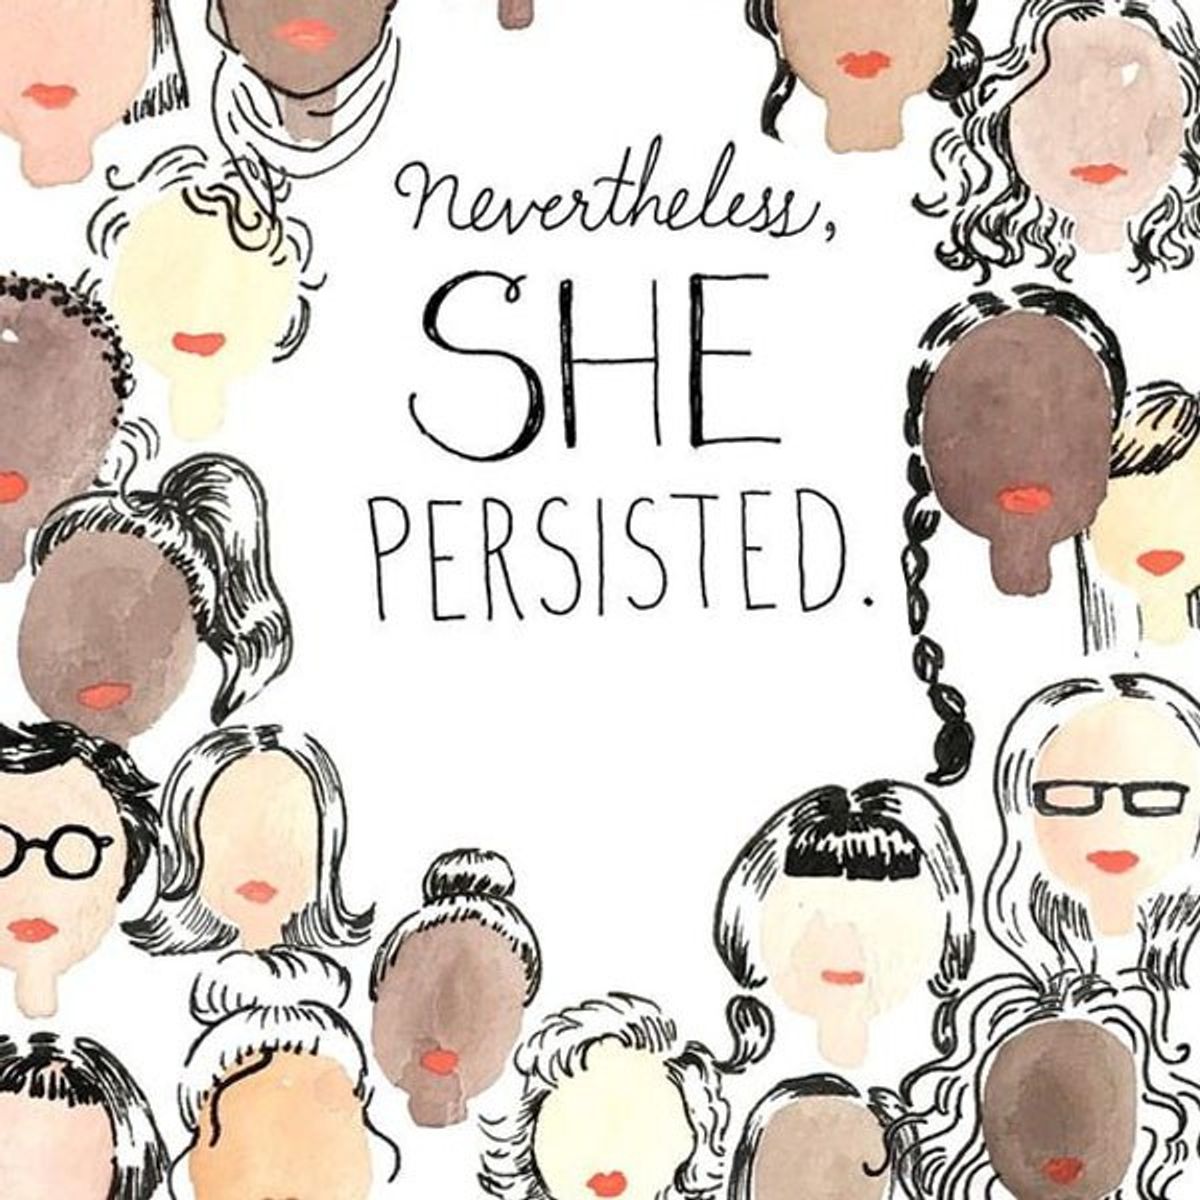 The Power Of Persistence: A Closer Look At The “Alpha Women” Of 2017